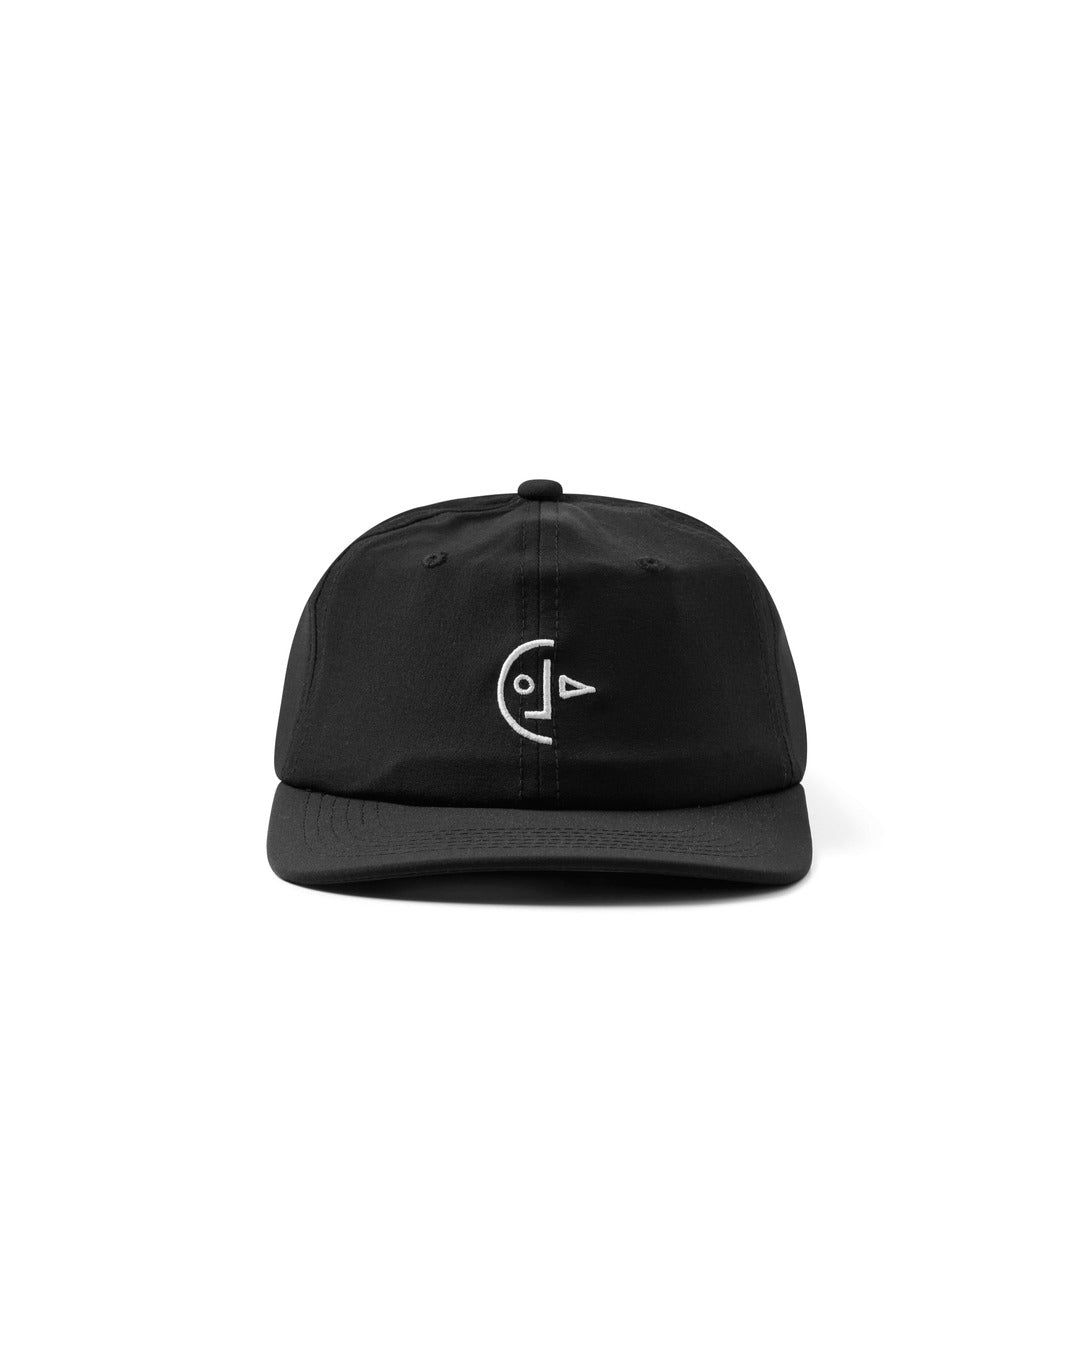 Sussex Technical 6-Panel - Black – Left of Field Golf